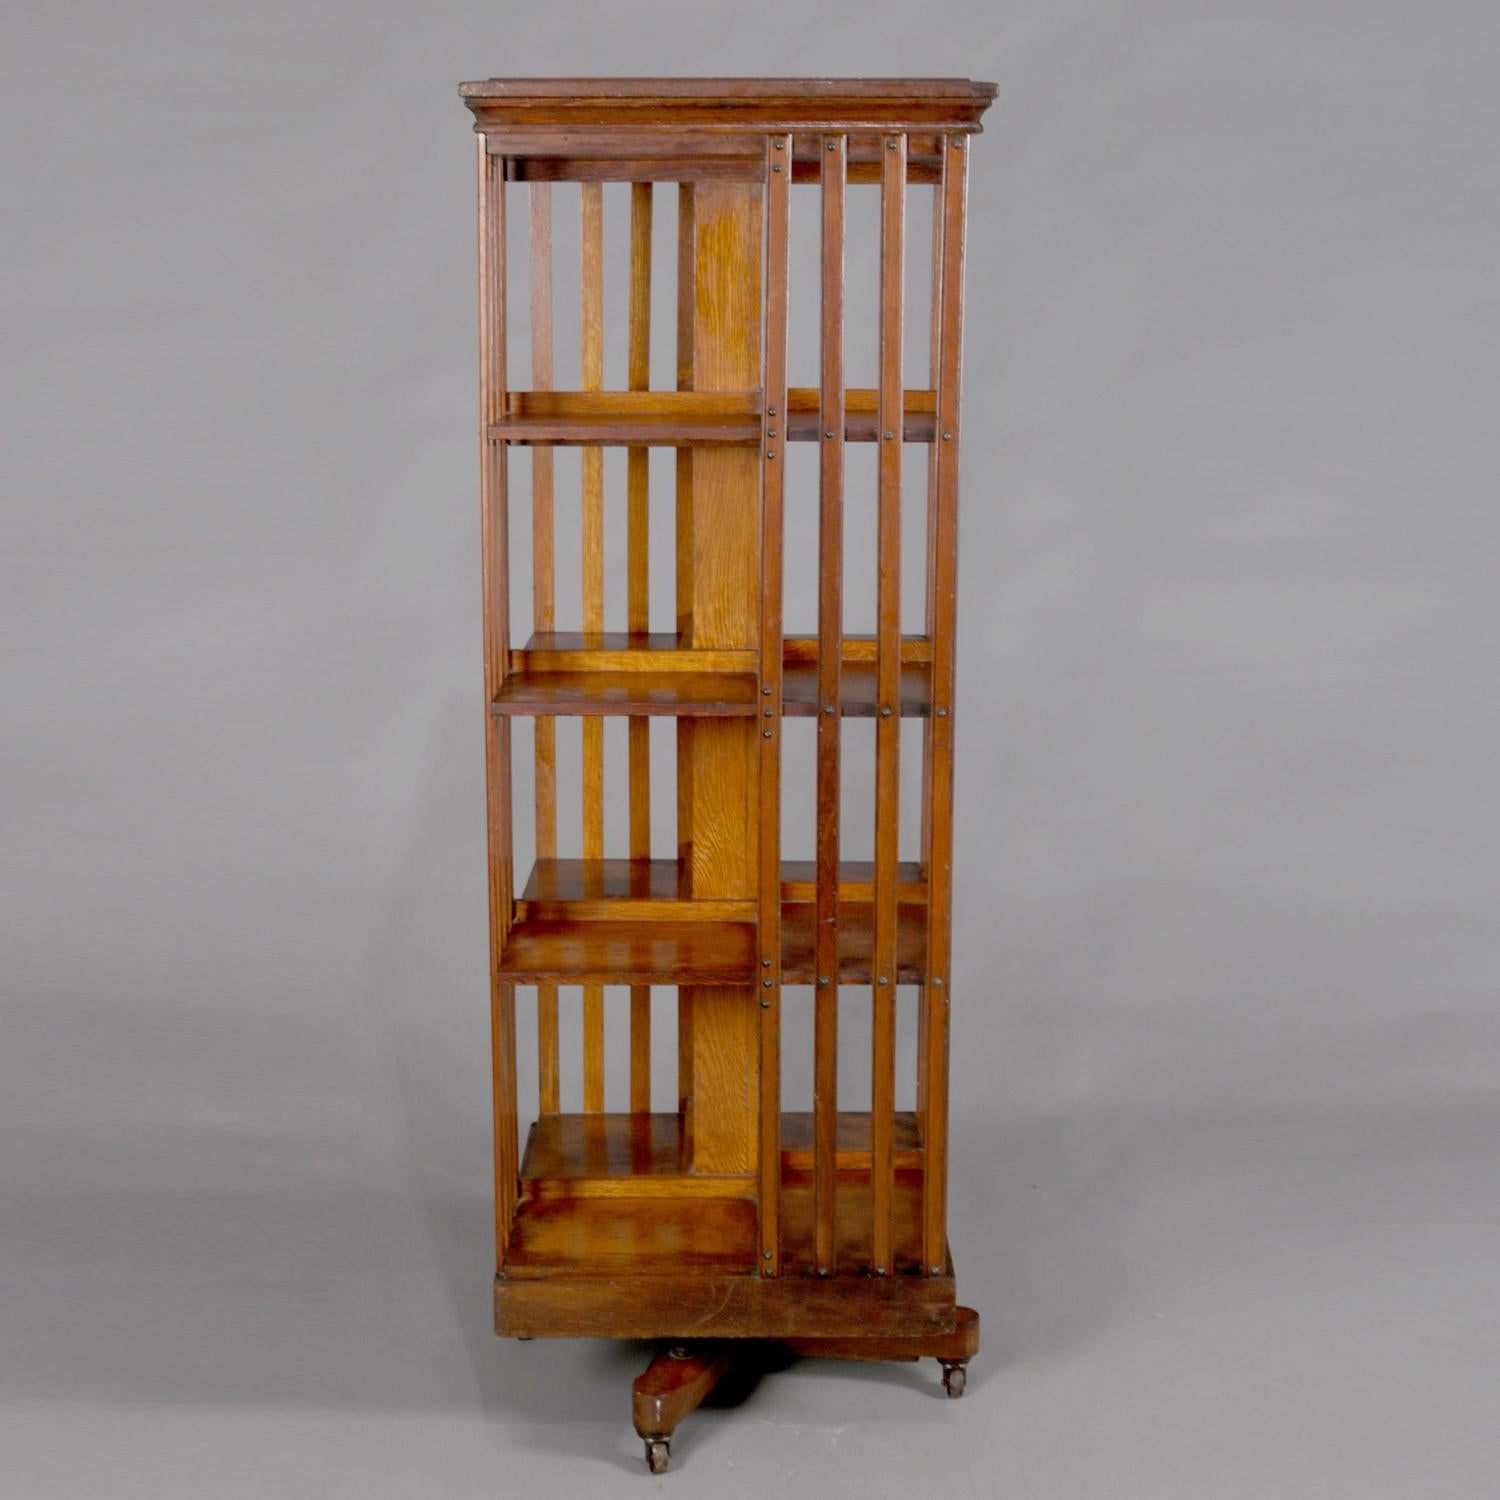 Antique Arts & Crafts Mission oak bookcase features square form with four shelves and slat sides, bookcase revolves and is seated on tripod base with wheels, Danner Trade Mark brand as photographed, circa 1910.

Measures - 55.5